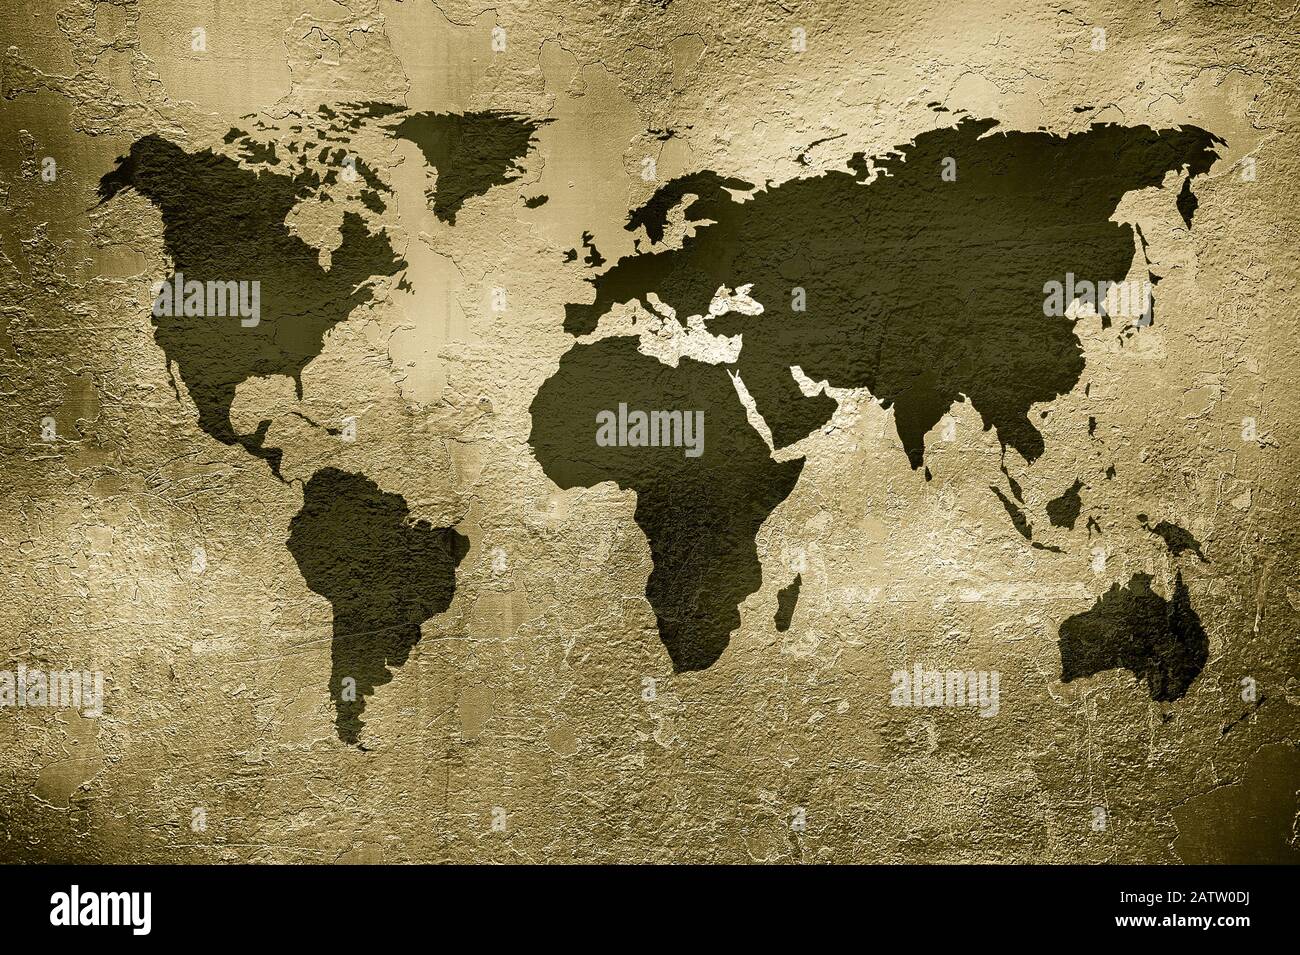 grunge map of the world over metal texture Stock Photo